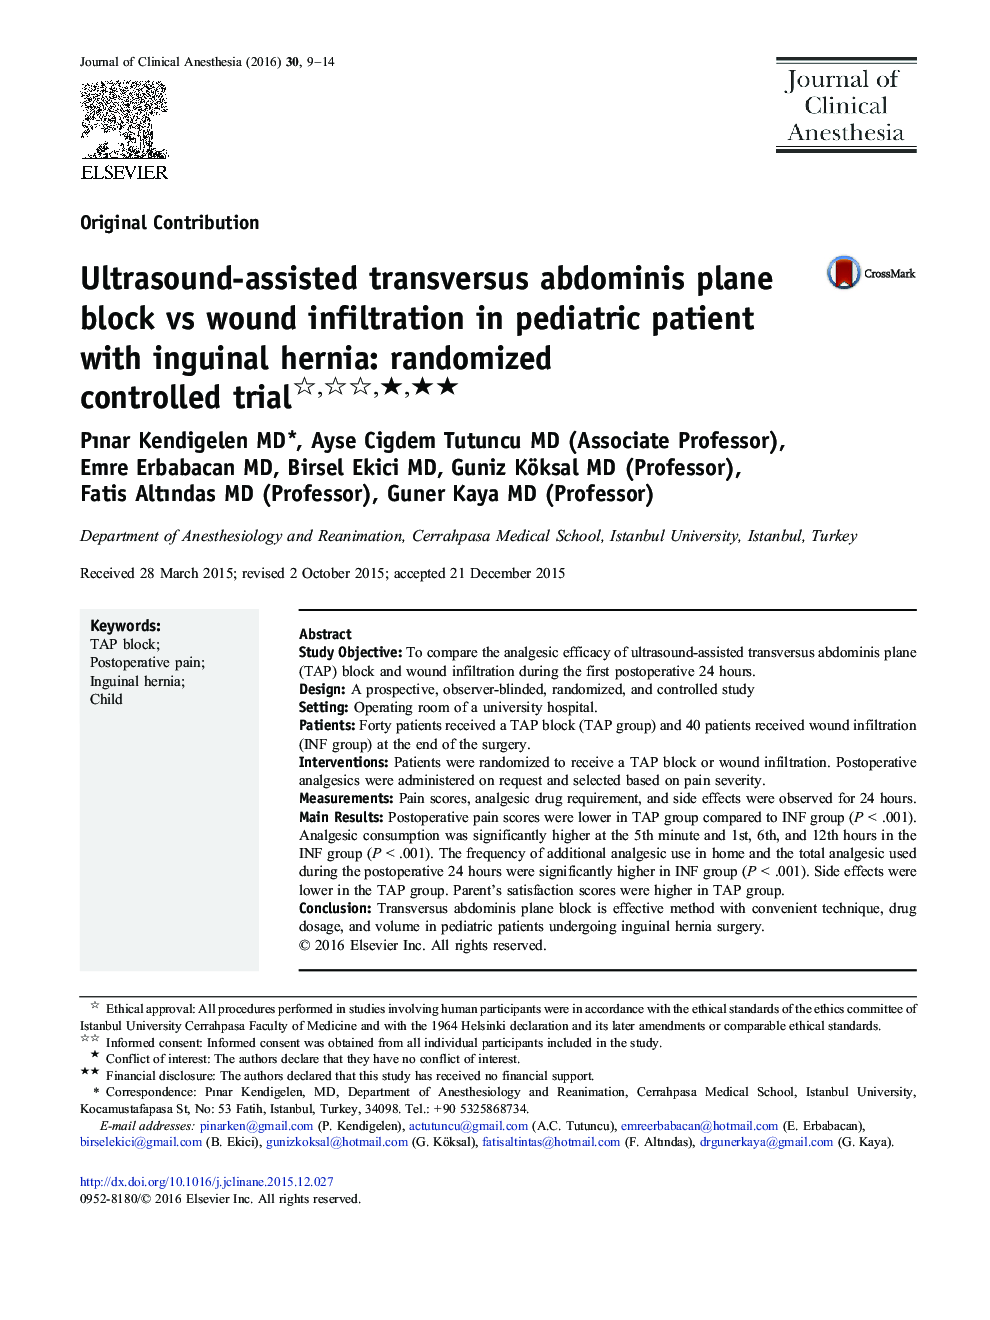 Ultrasound-assisted transversus abdominis plane block vs wound infiltration in pediatric patient with inguinal hernia: randomized controlled trial